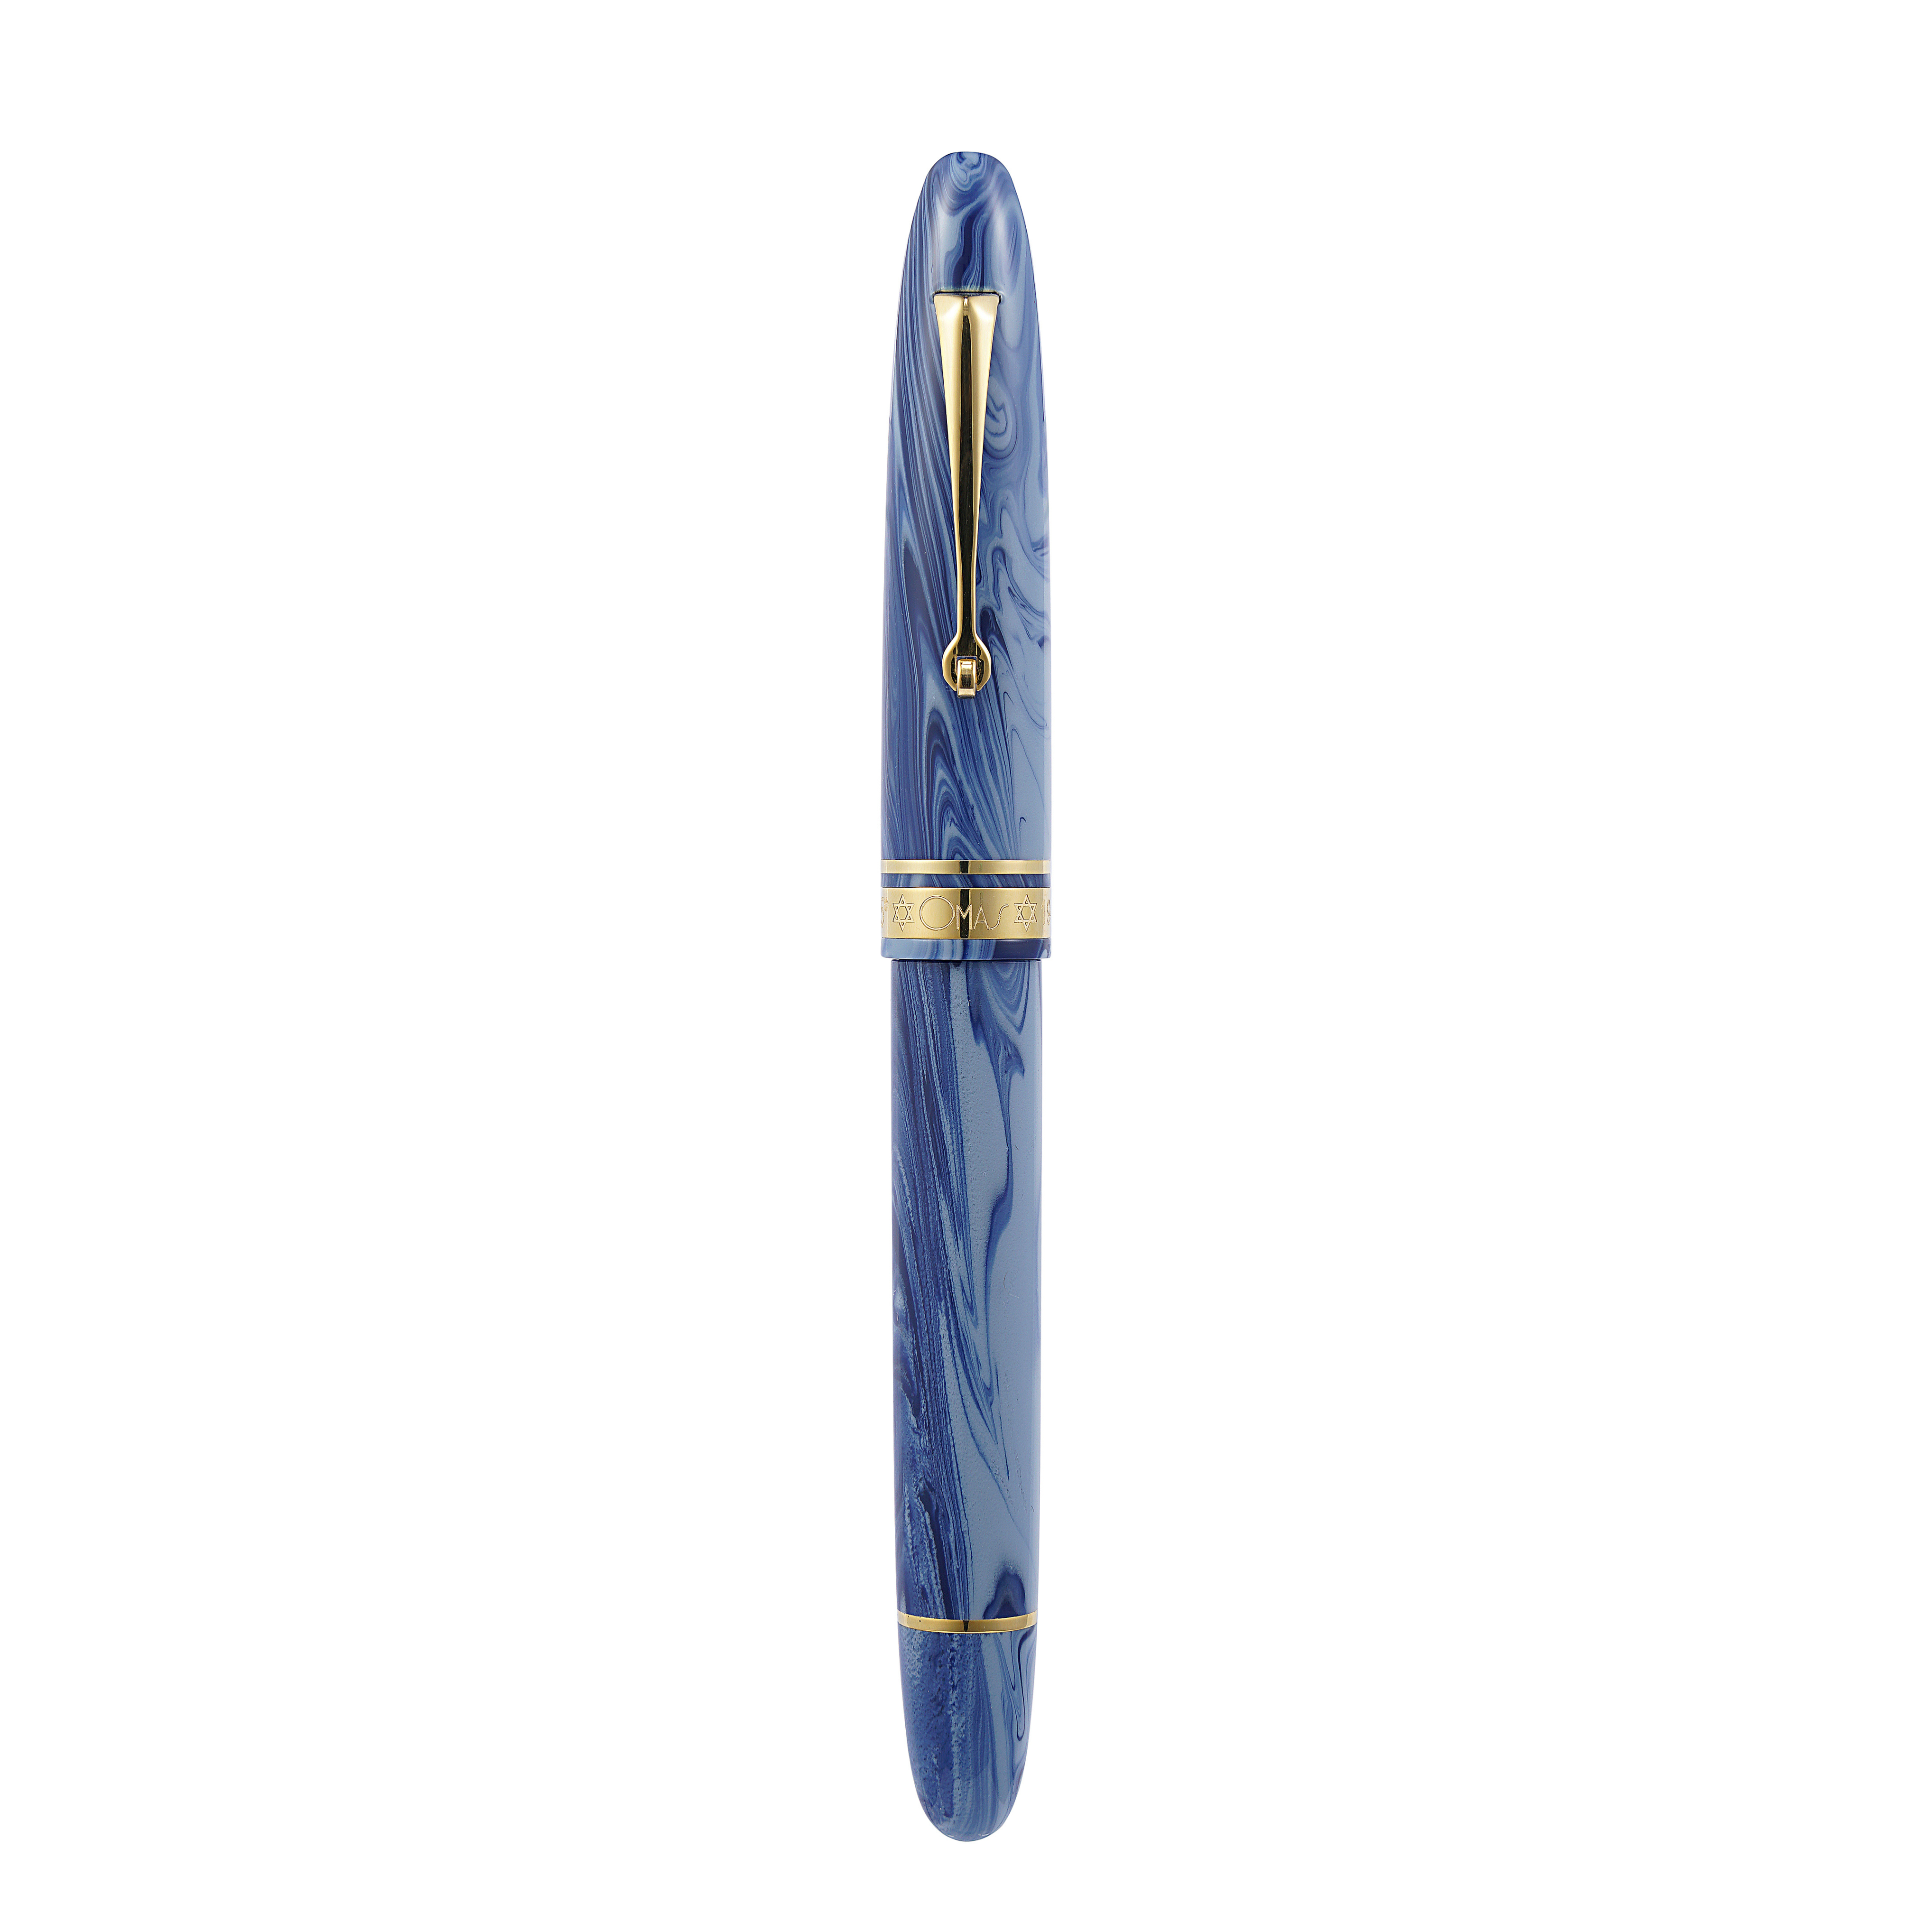 OMAS Ogiva Israel Limited Edition Fountain Pen with Gold Trim